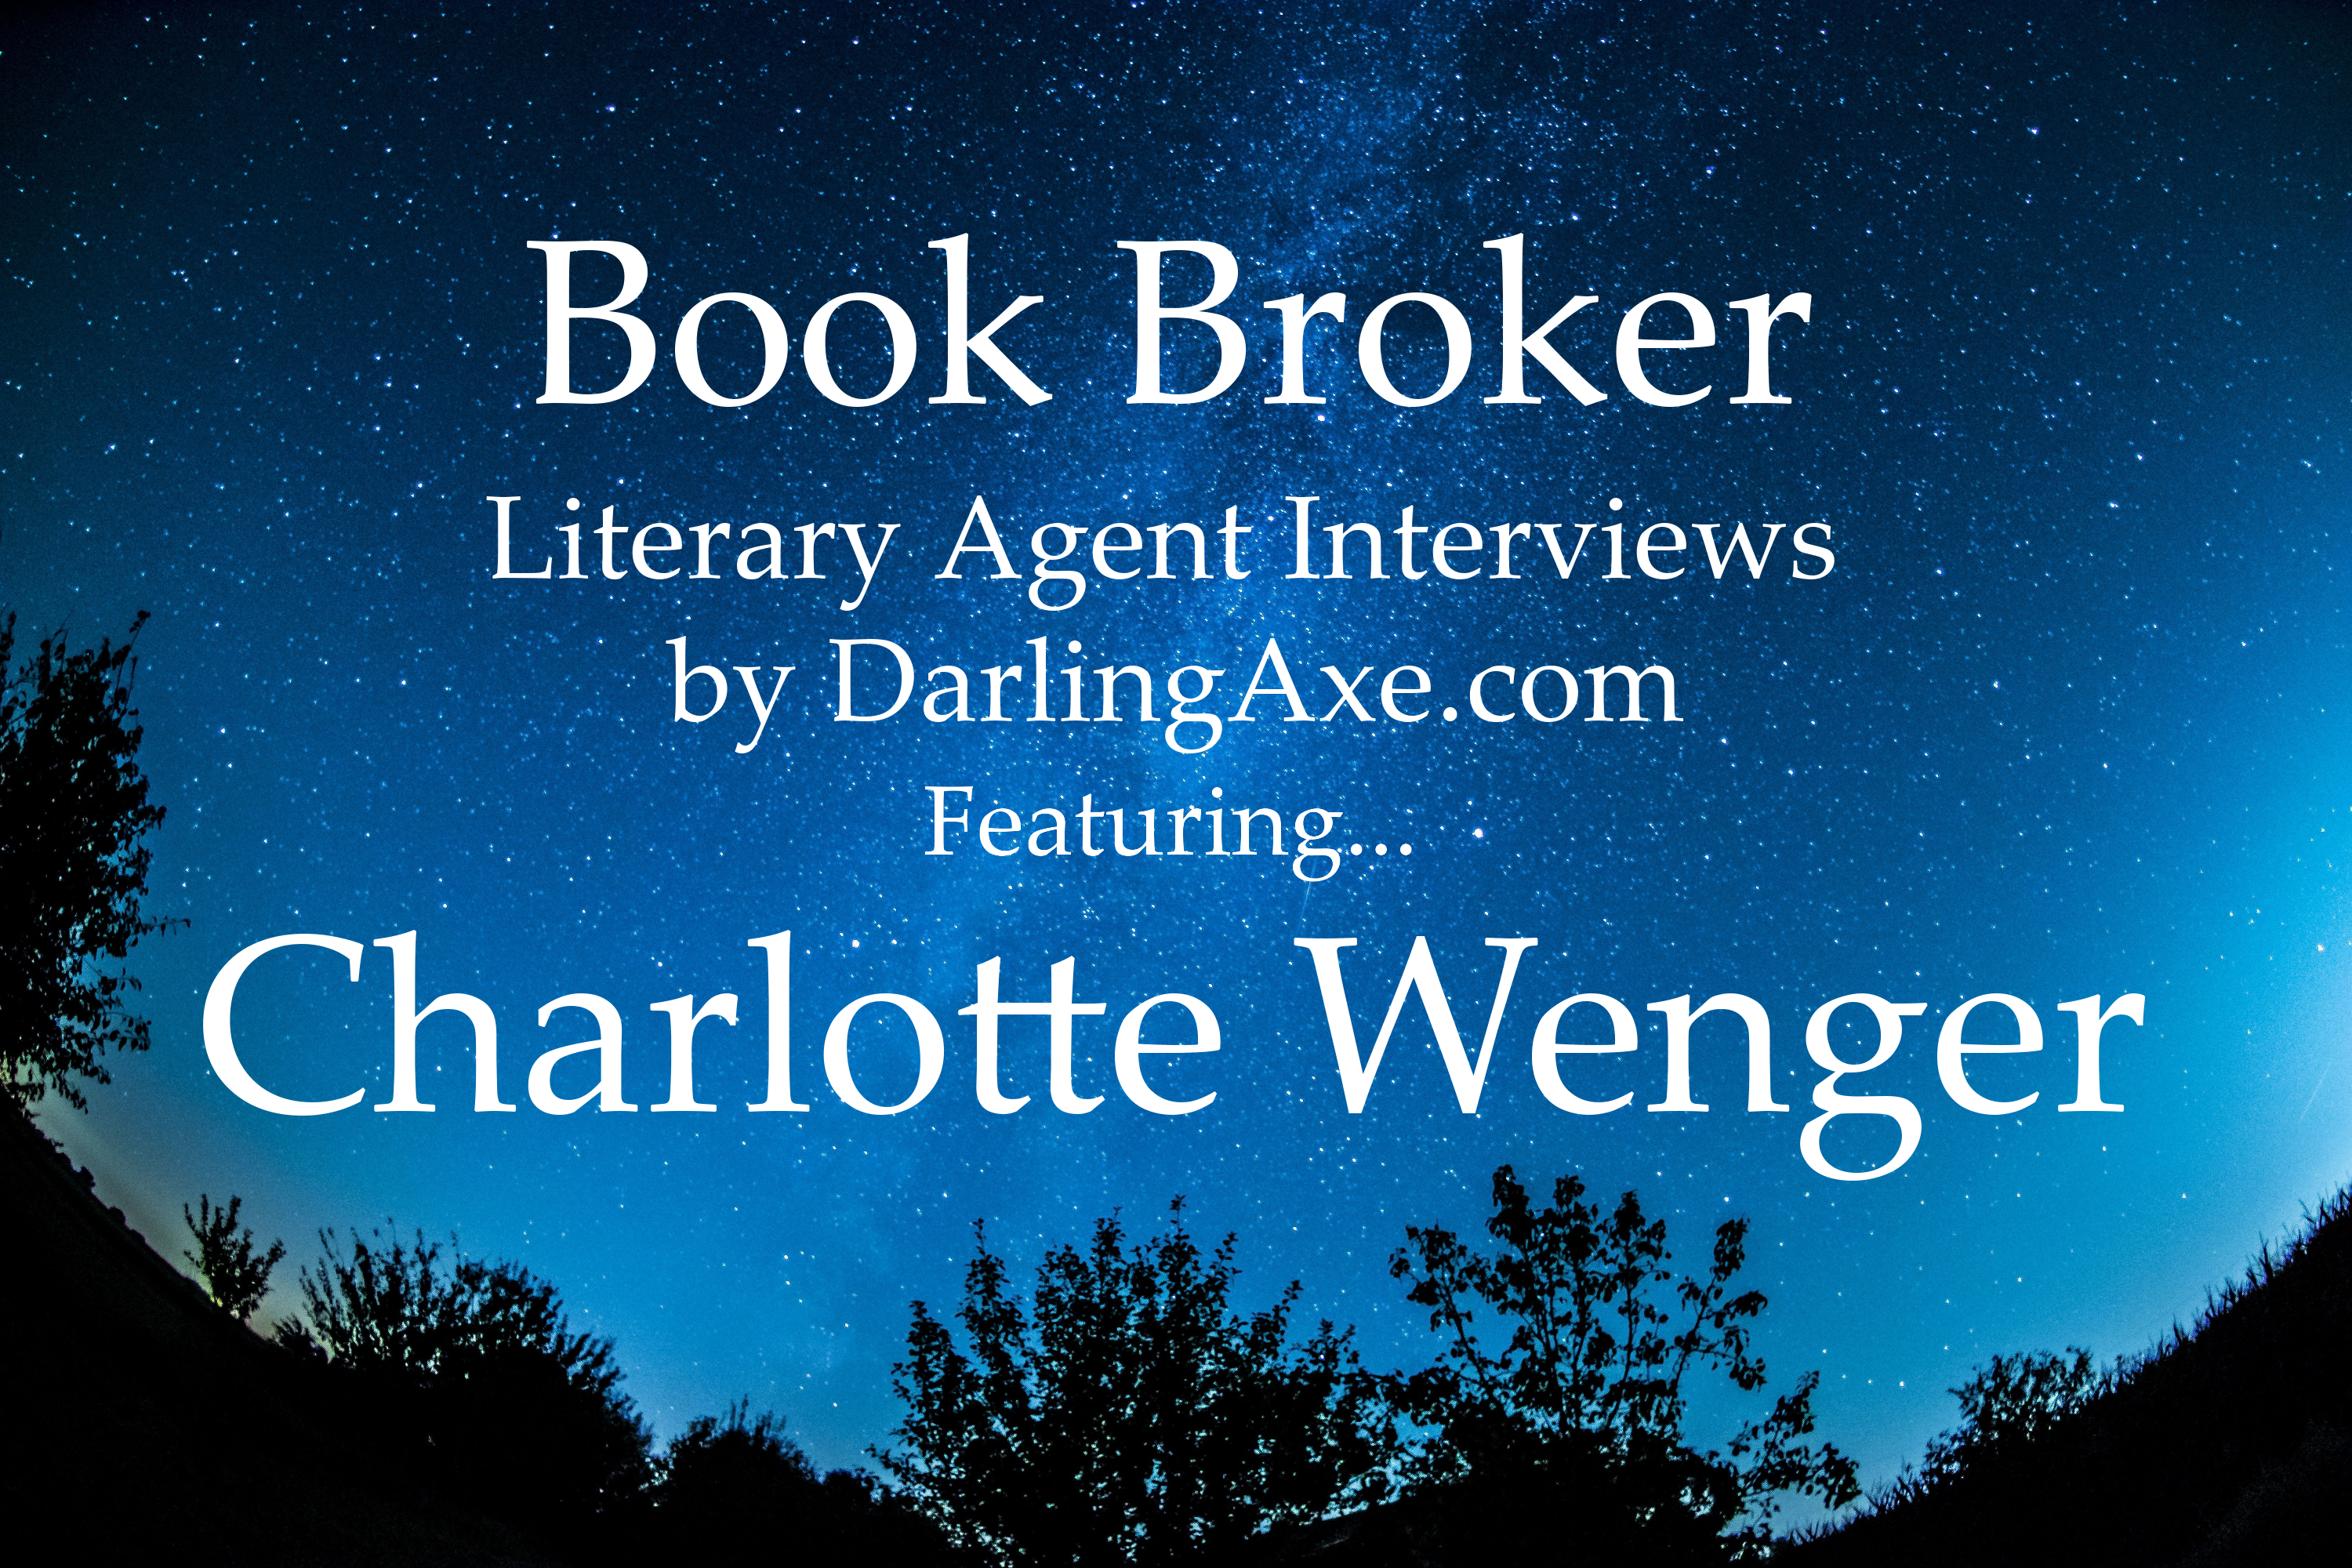 Book Broker—an interview with Charlotte Wenger